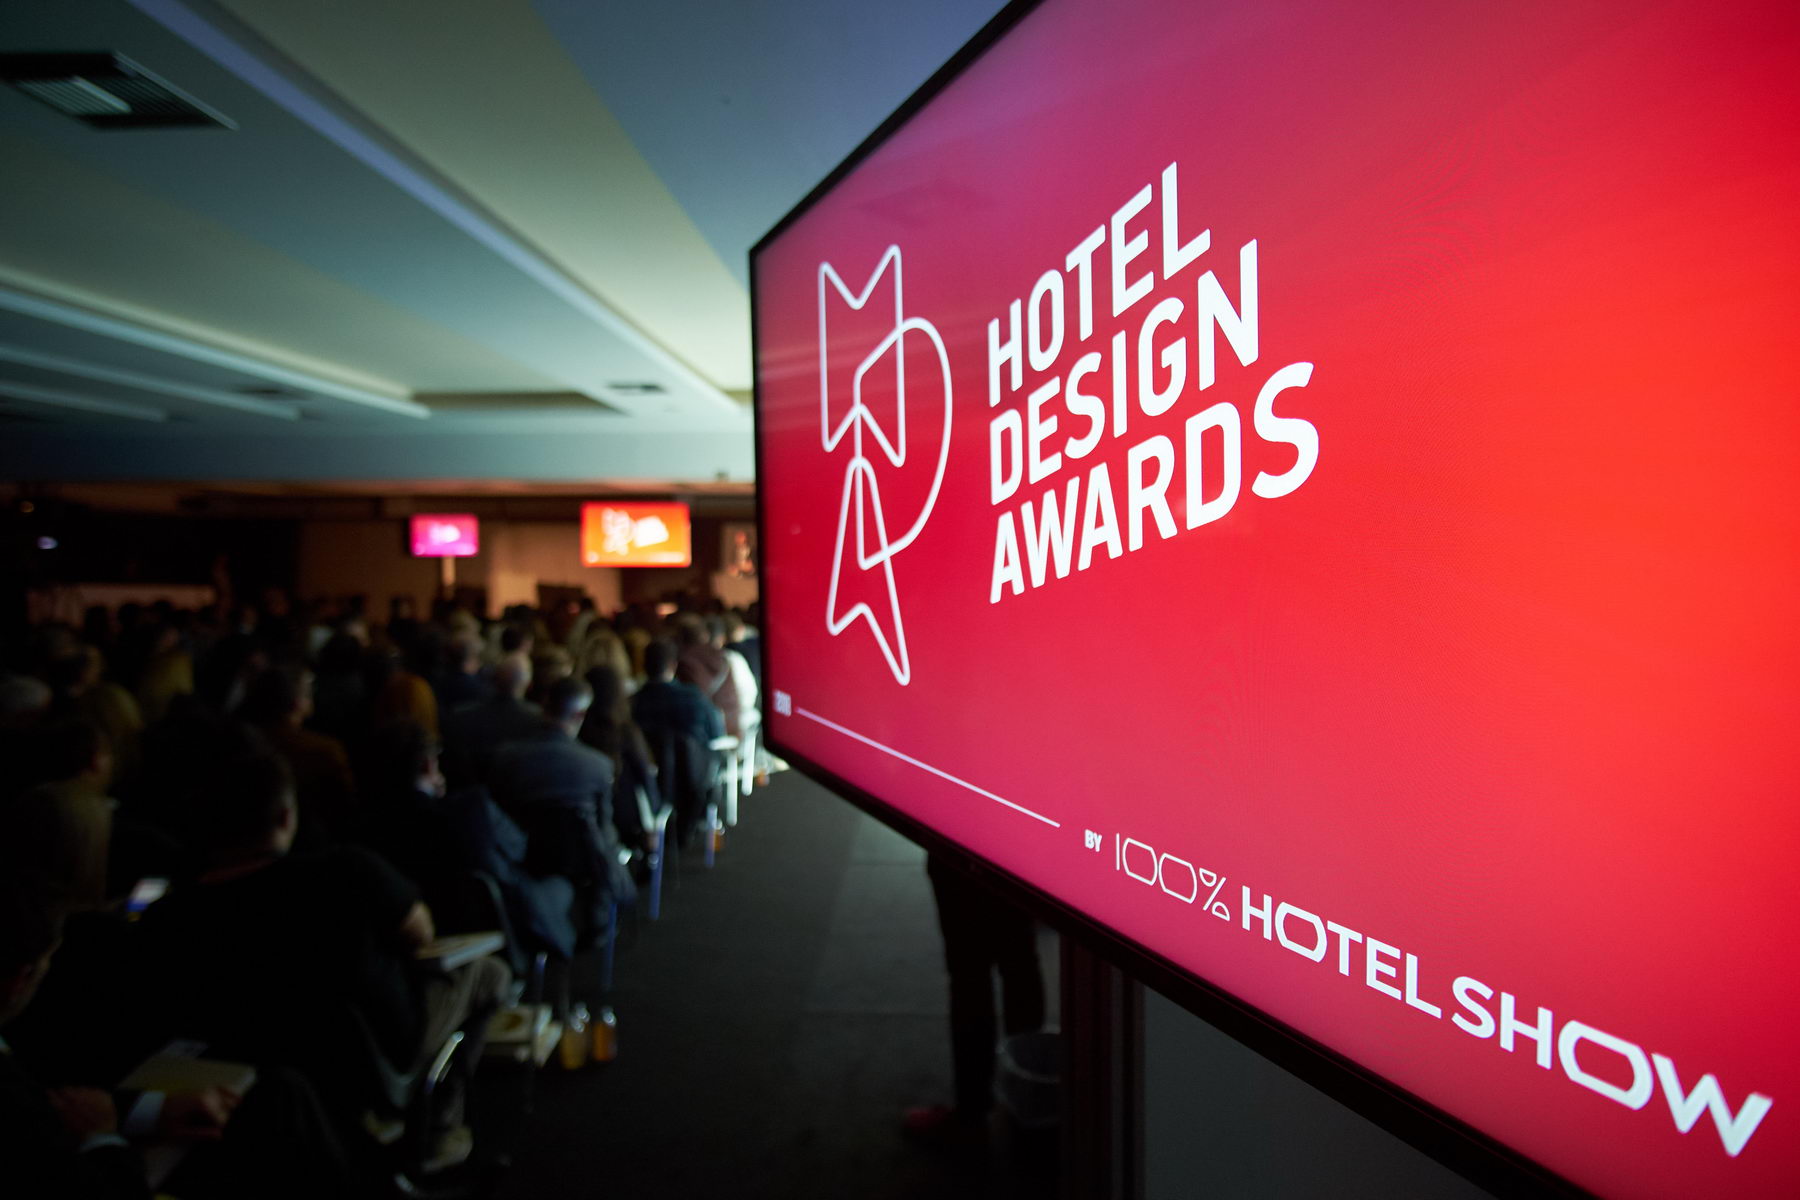 This is why the 100% Hotel Design Awards are the most important Hotel Awards in Greece!